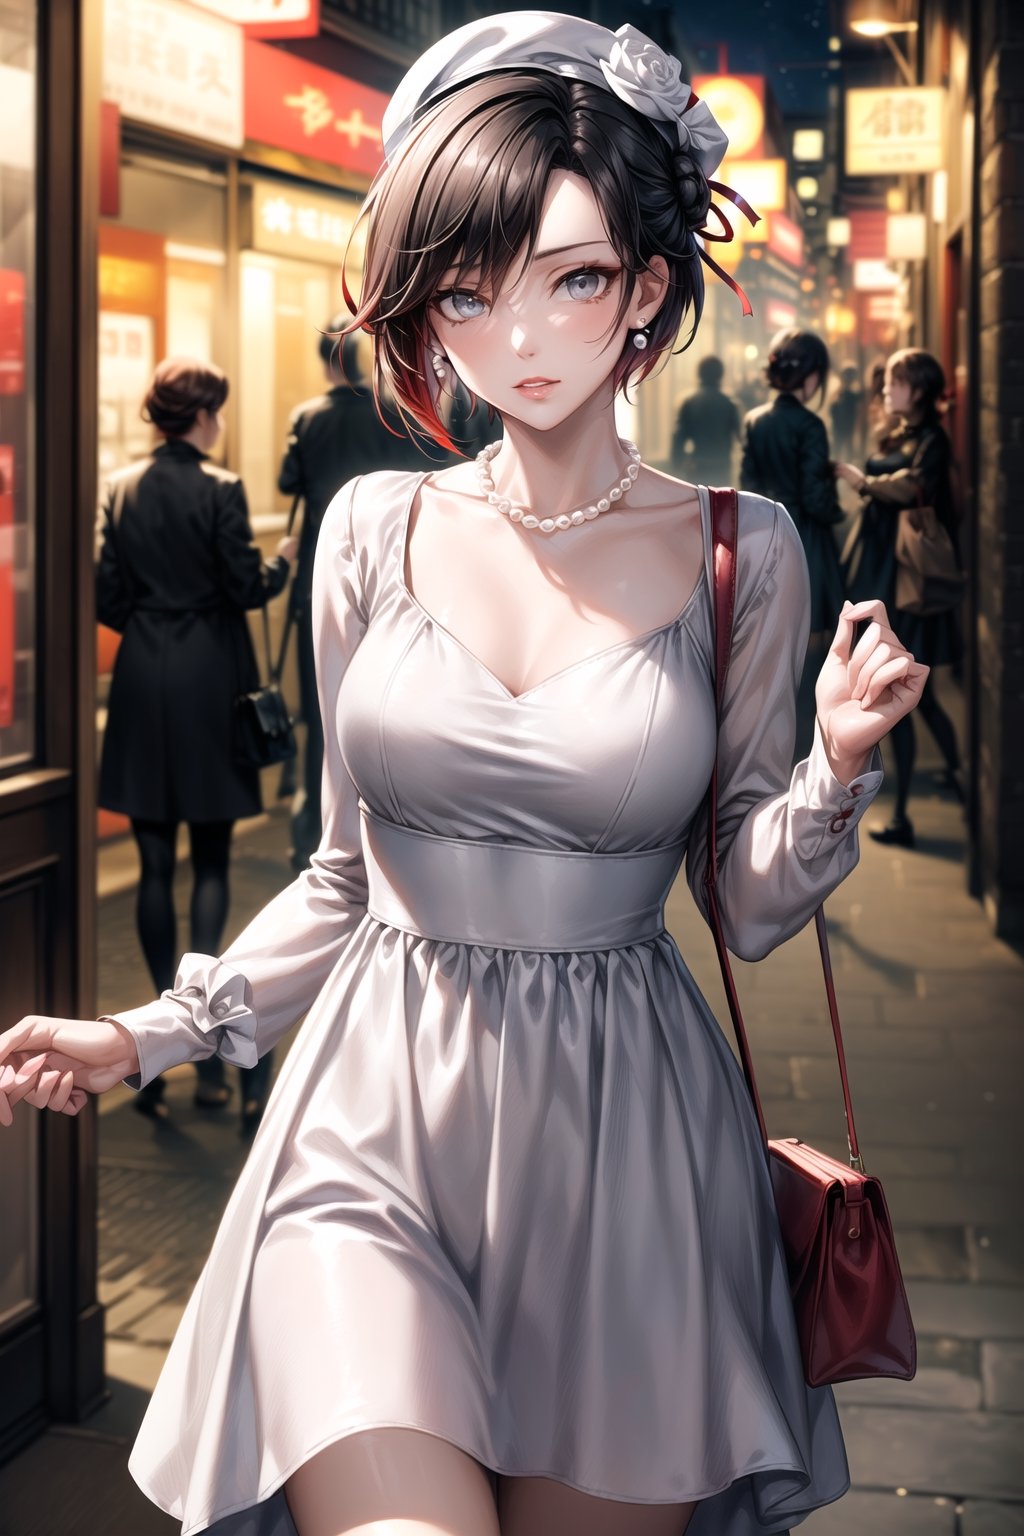 (best quality), (highly detailed), masterpiece, (official art), ,(ruby rose:1.2, hair bun:1.3), makeup:1.3, (lips:1.2), parted_lips, blue earrings:1.3,jewelery:1.3,((long sleeves,  dress, ribbon, ccollarbone, white dress:1.3,  white headwear,  pearl necklace:1.3, holding, holding bag, v arms:1.3)), looking at viewer, china, asiática, city, night, sky,  (intricately detailed, hyperdetailed), blurry background,depth of field, best quality, masterpiece, intricate details, tonemapping, sharp focus, hyper detailed, trending on Artstation,1 girl, high res, official art,StandingAtAttention,bestiality